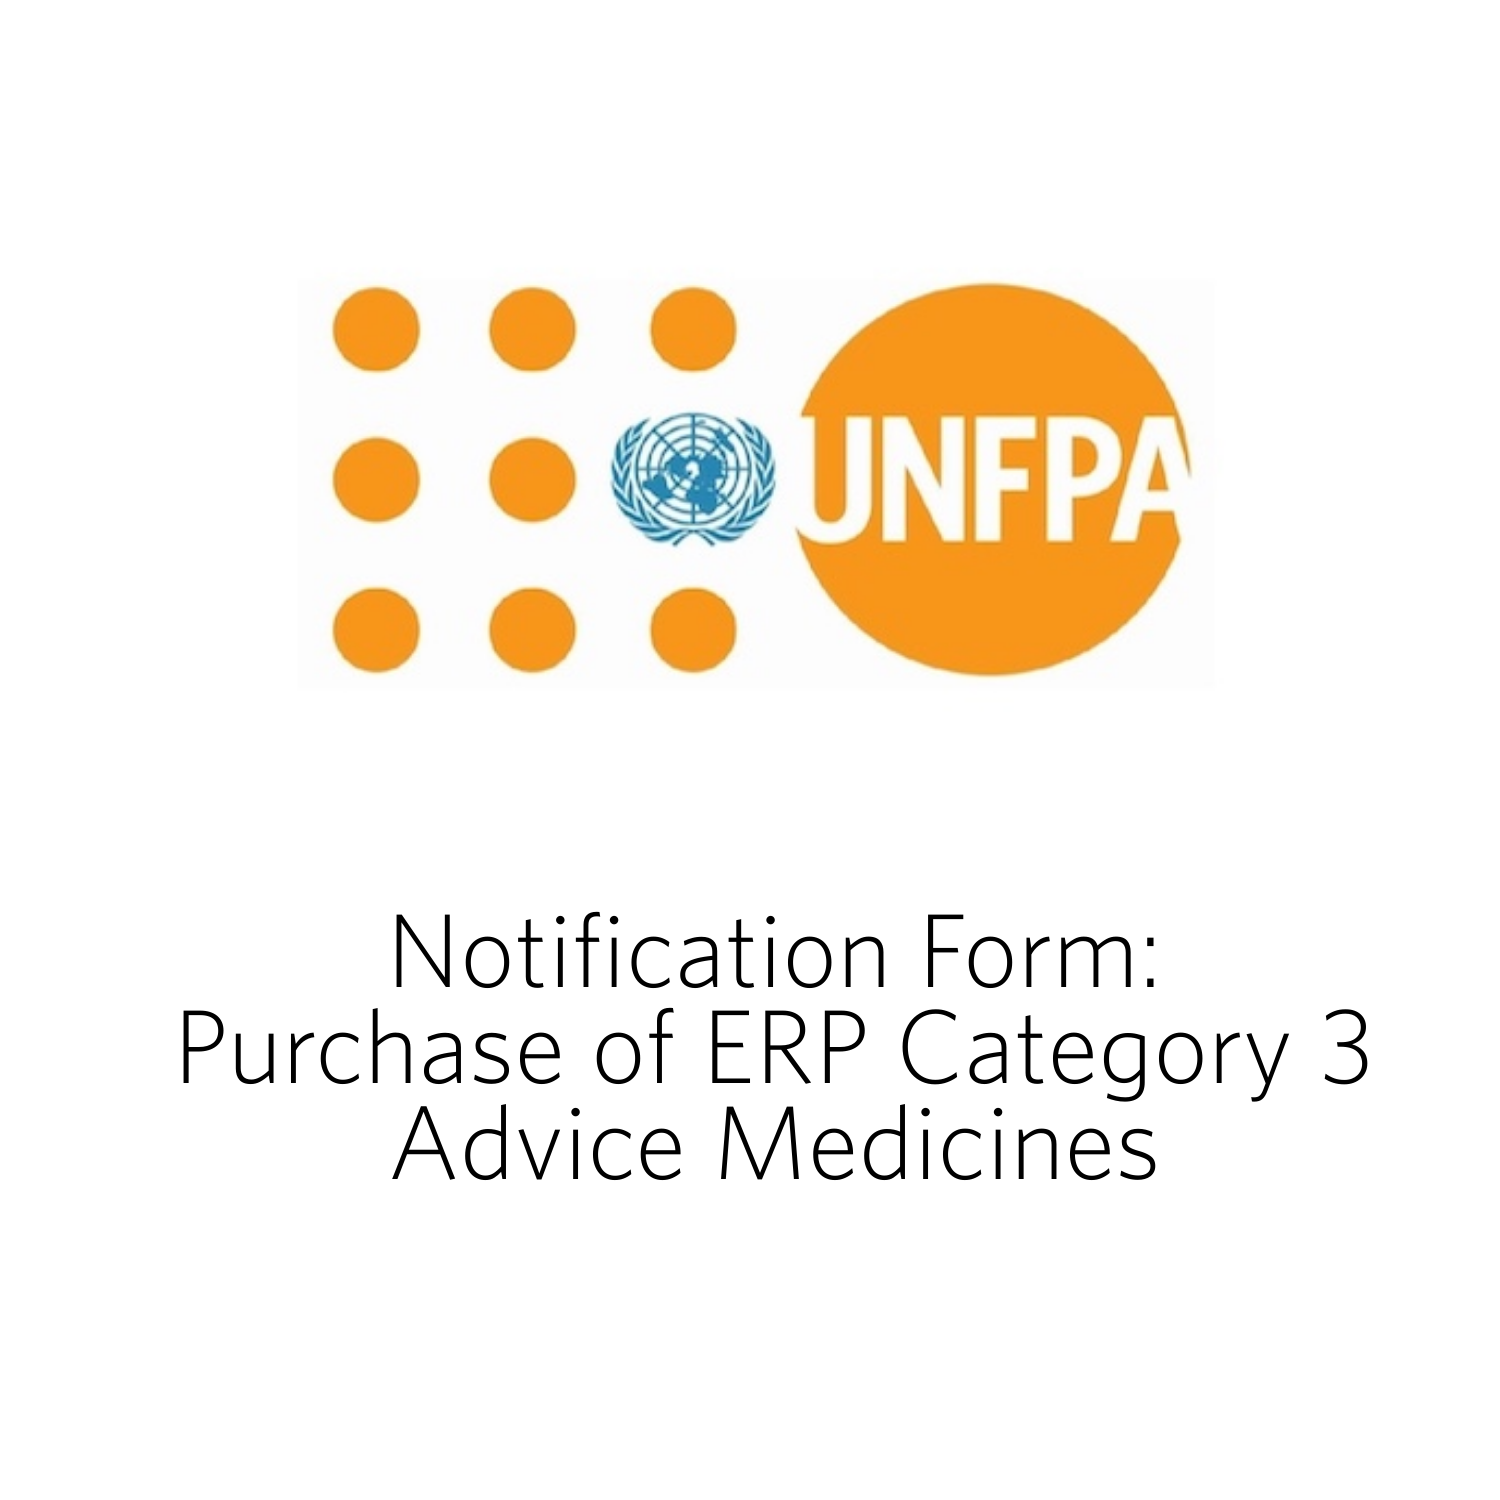 Notification Form for Purchase of ERP Category 3 Advice Medicines